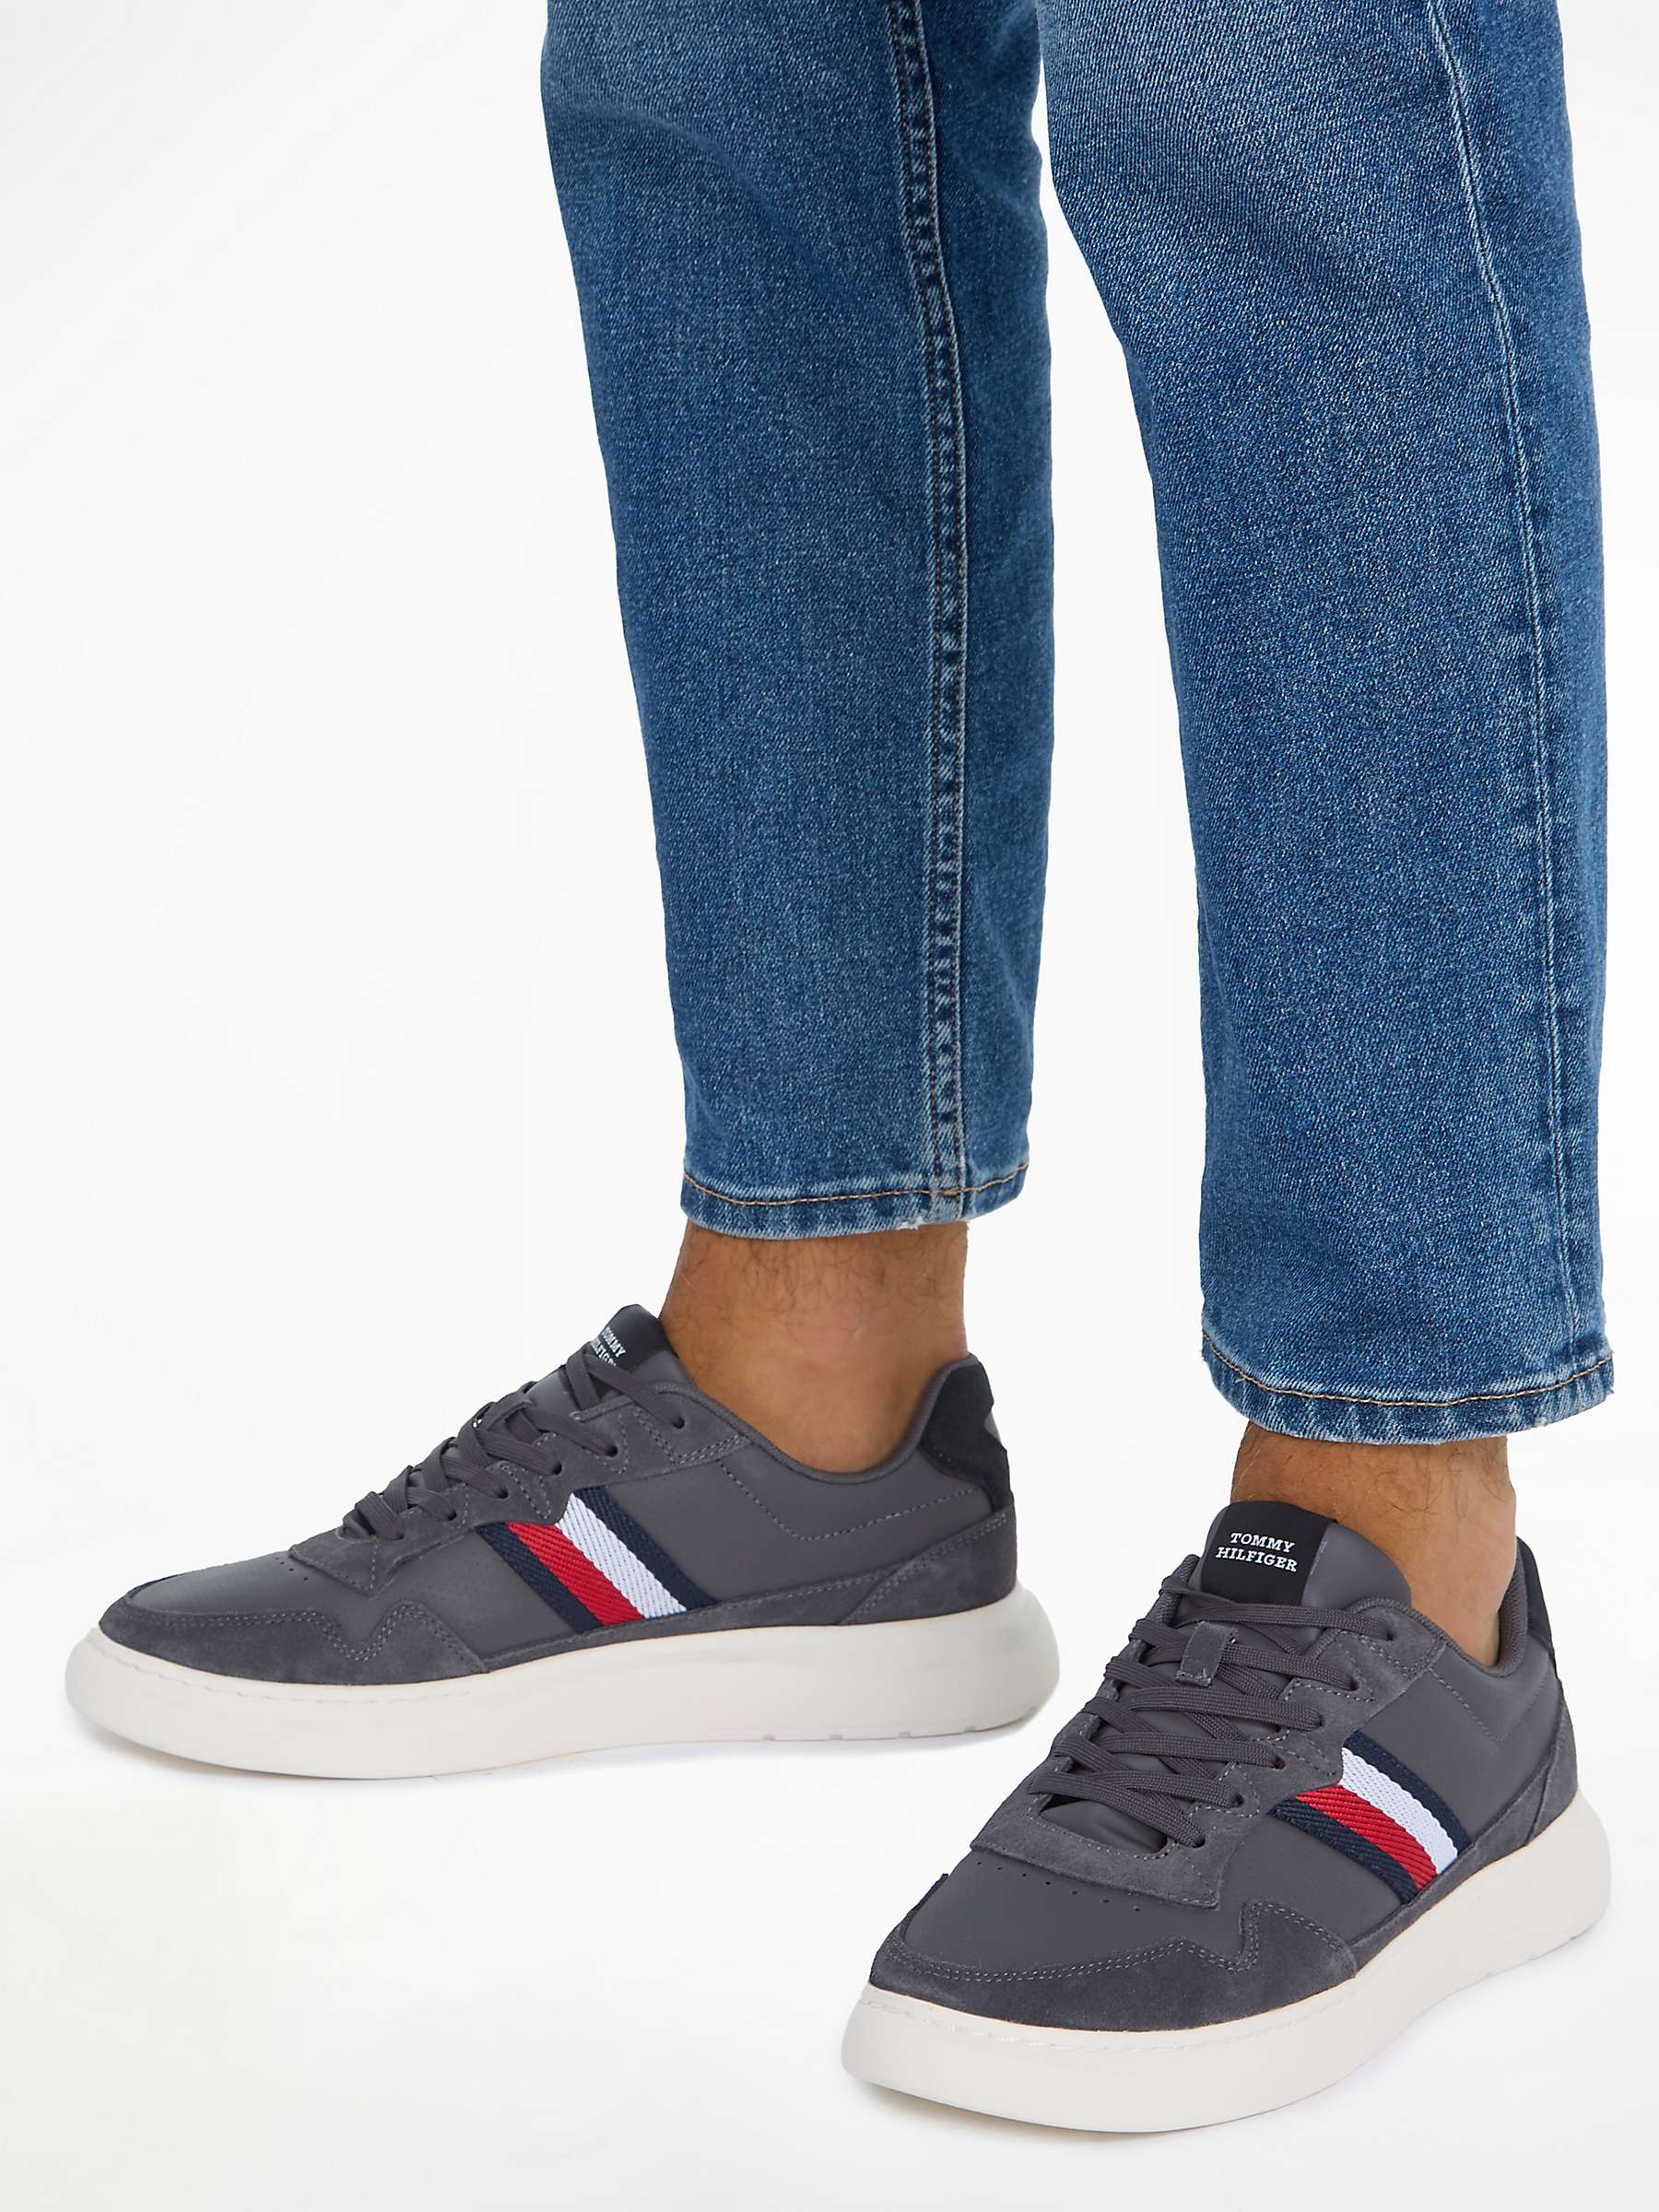 Buy Tommy Hilfiger Leather Trainers, Grey Online at johnlewis.com